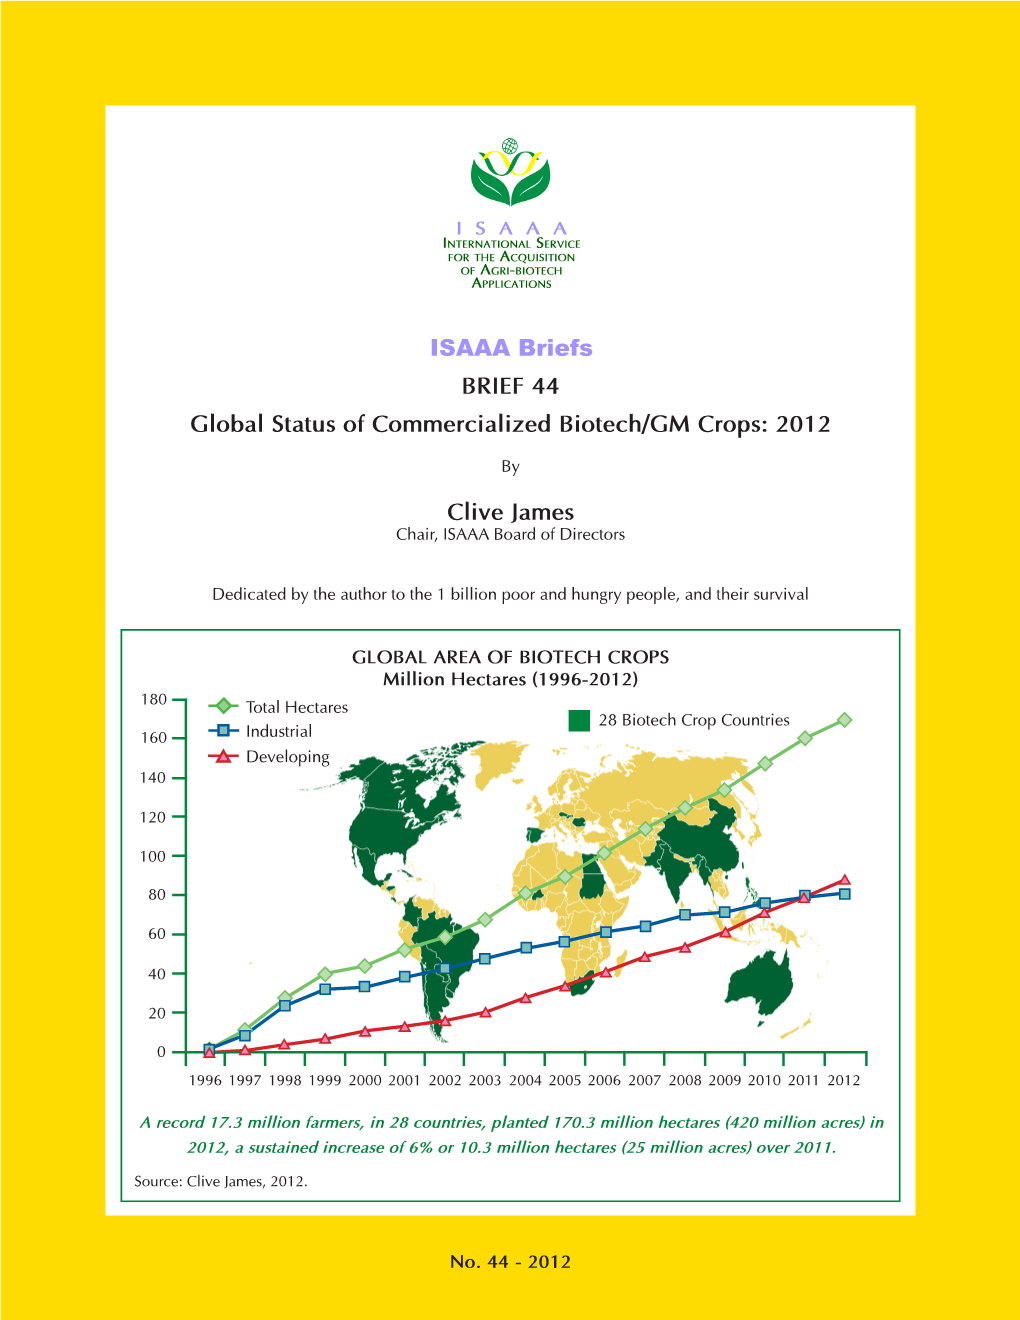 Global Status of Commercialized Biotech/GM Crops in 2012